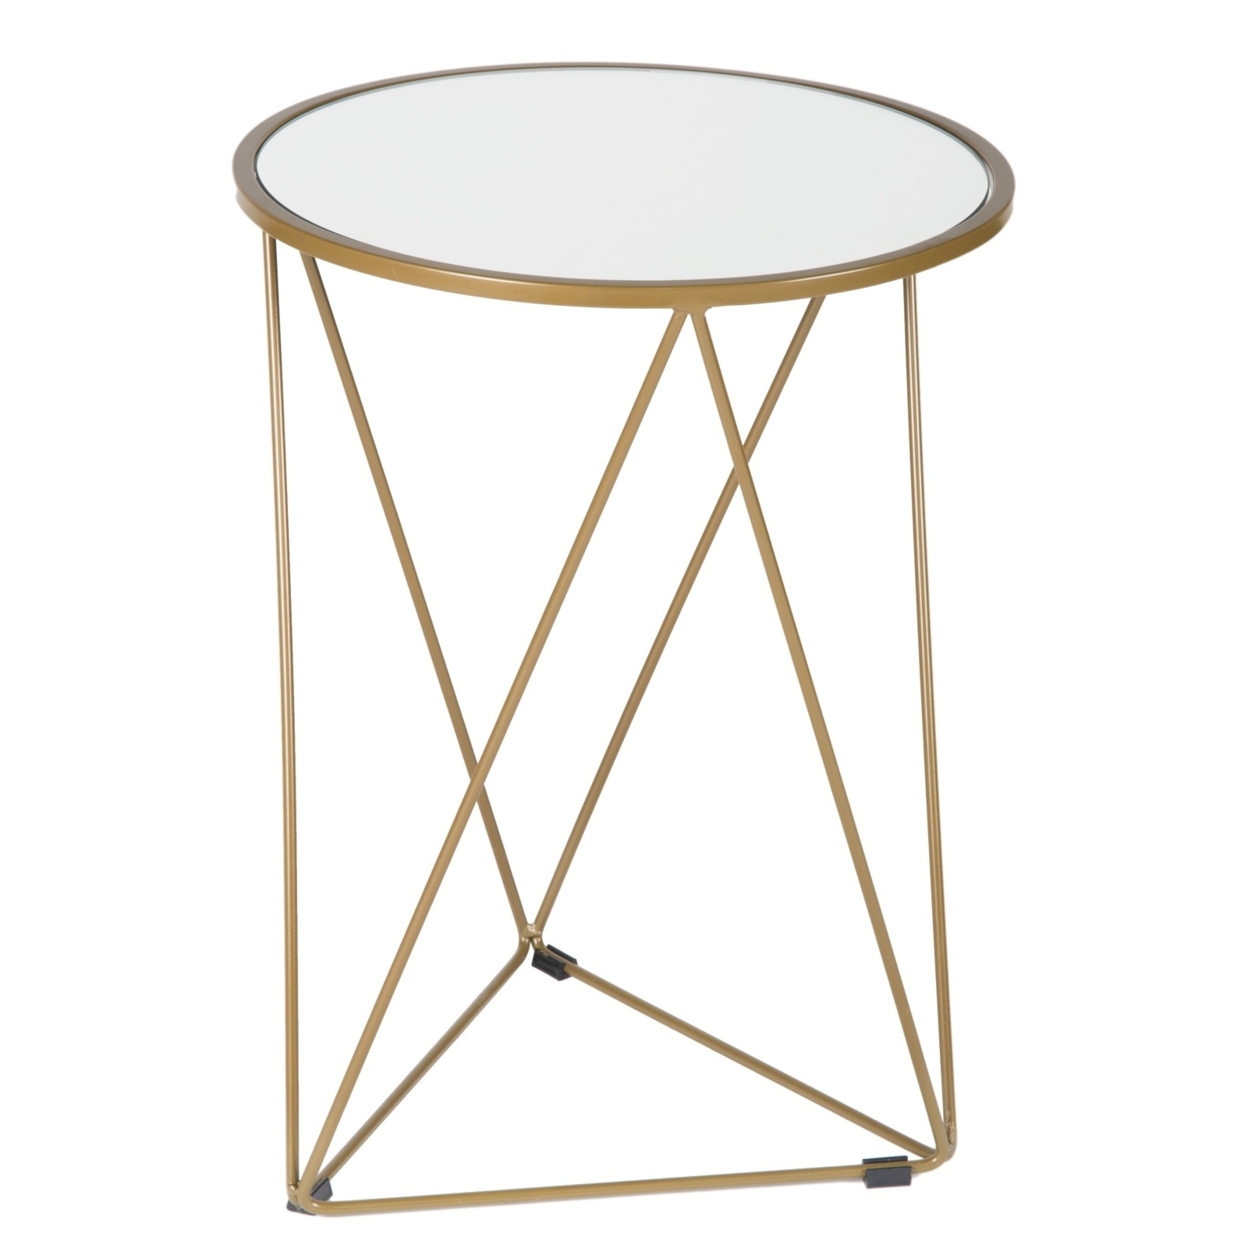 Metal Accent Table With Geometric Base And Round Glass Top, Gold- Saltoro Sherpi